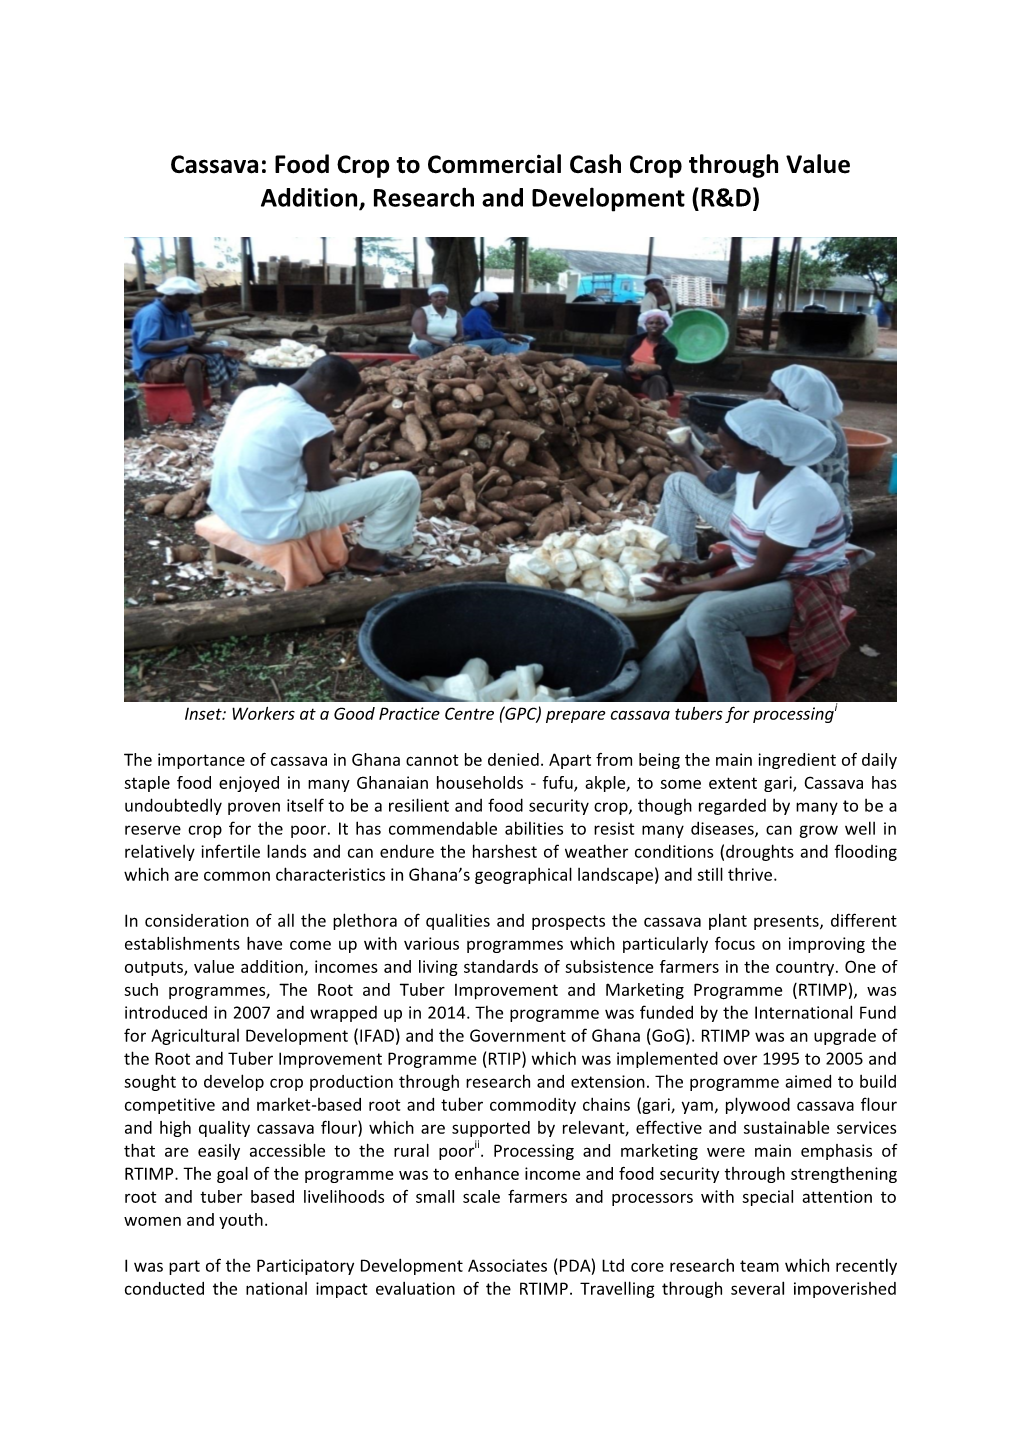 Cassava: Food Crop to Commercial Cash Crop Through Value Addition, Research and Development (R&D)